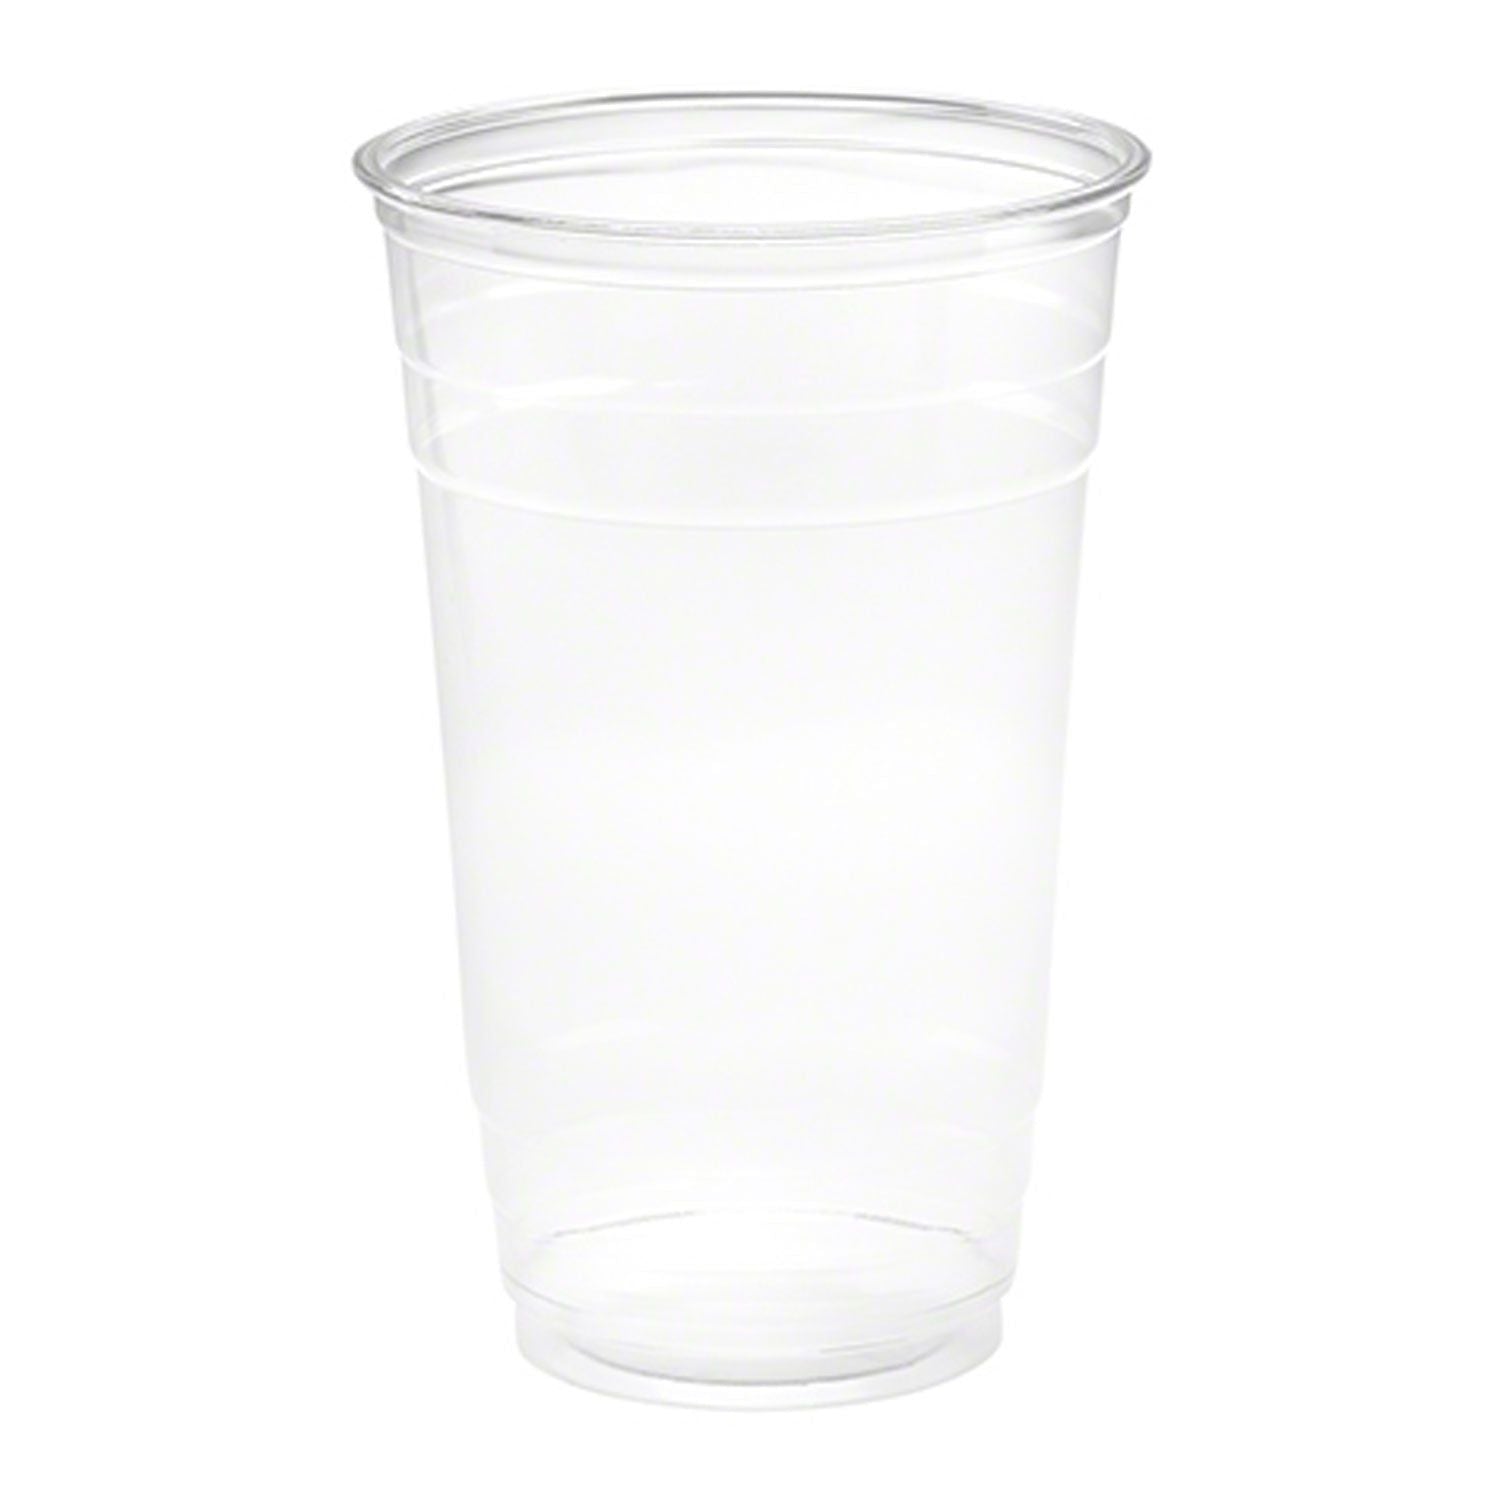 https://thecupstore.com/cdn/shop/files/opt-24oz-Blank-Recyclable-Plastic-Cup.jpg?v=1686297788